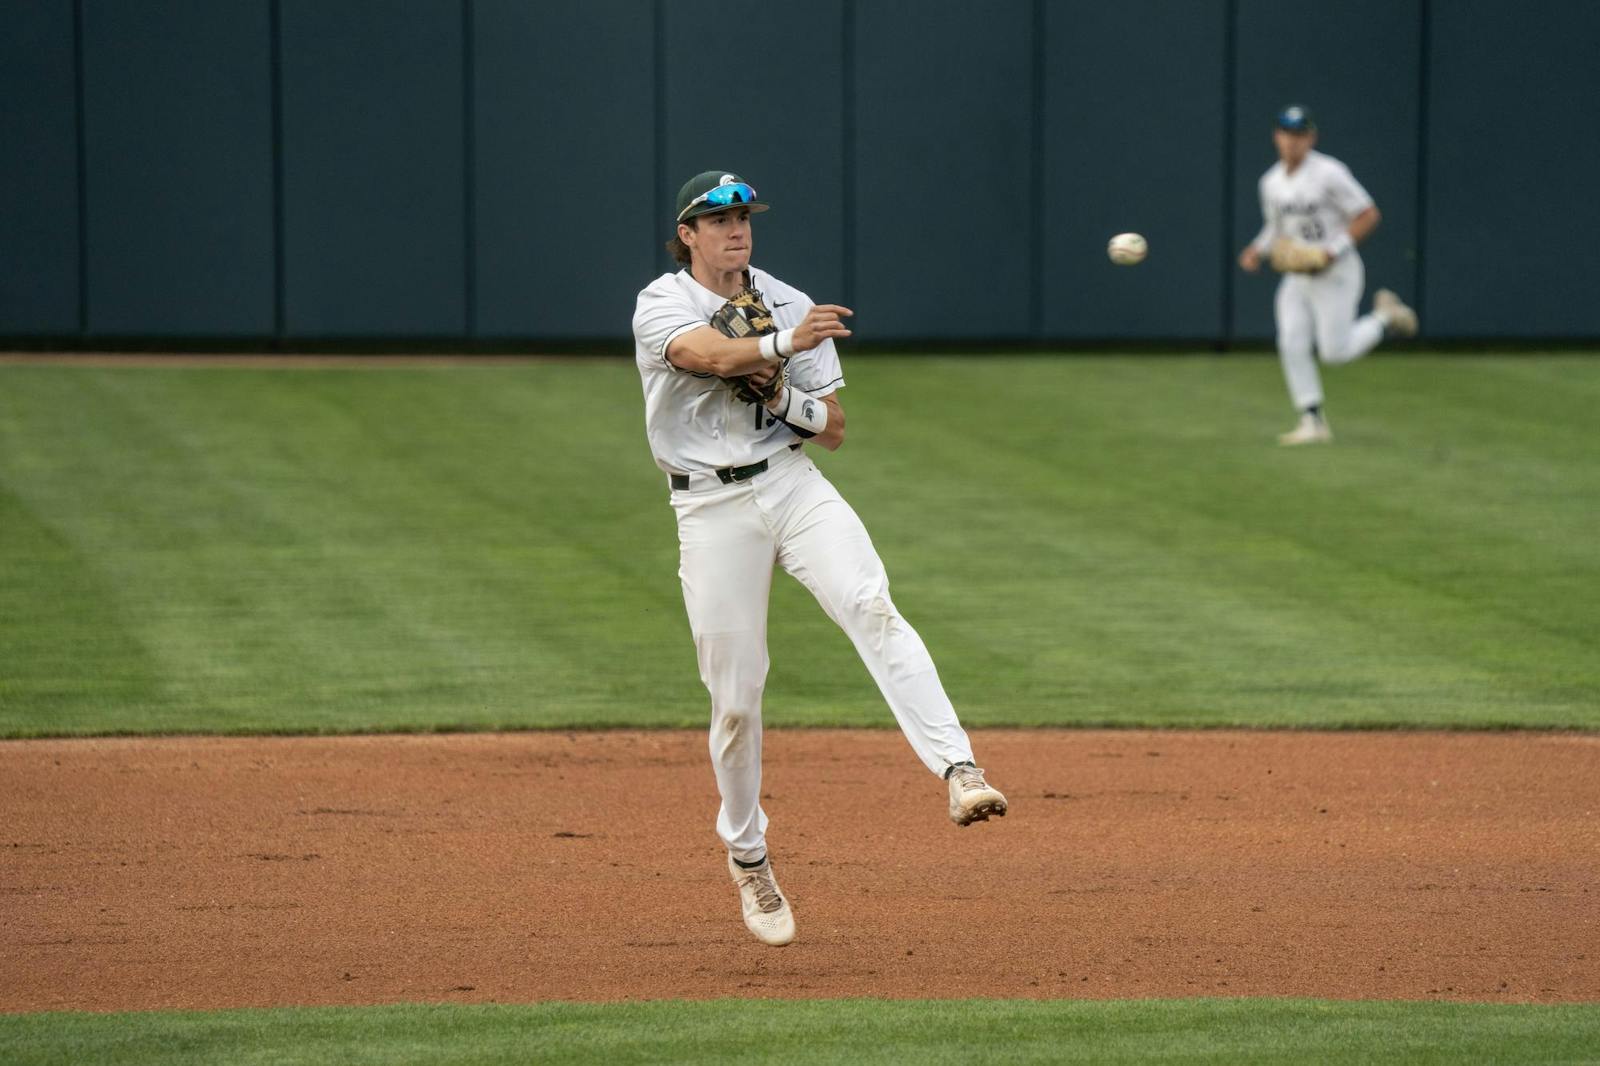 MSU baseball standout Mitch Jebb selected in second round of MLB